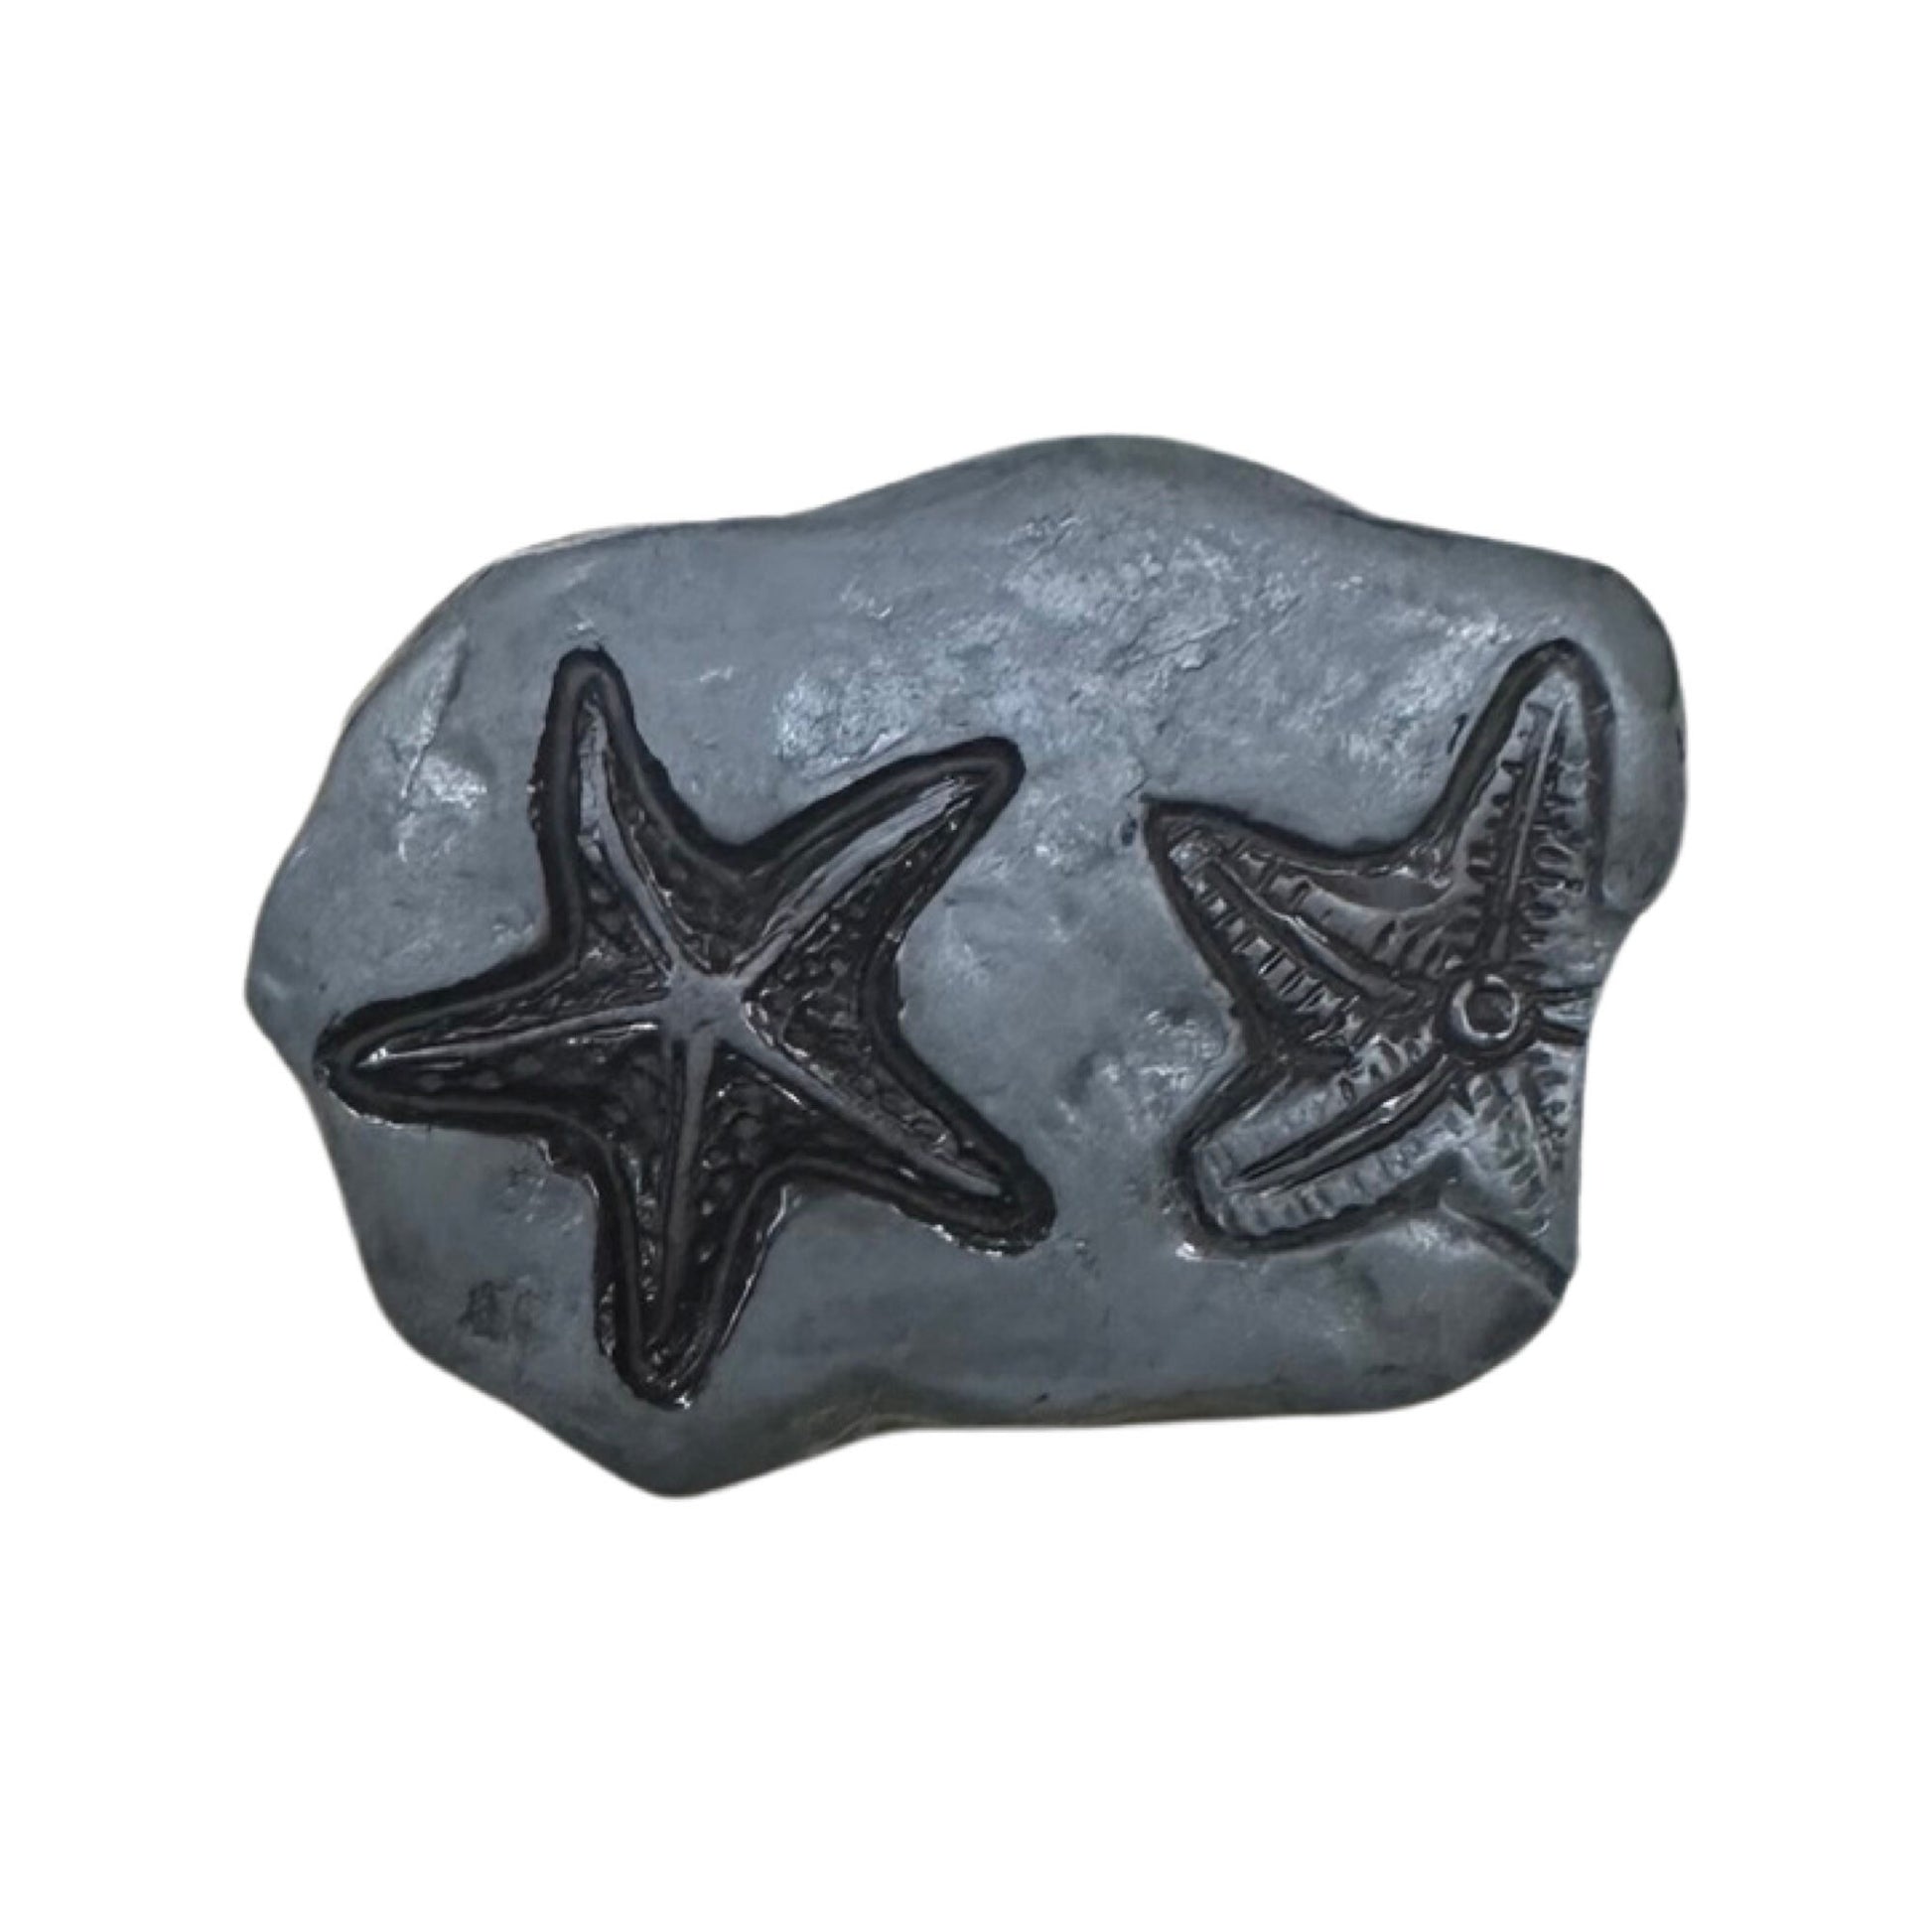 Fossil| fossil shoe charm| fossils| paleontology| shoe charms | gifts for boys| curiosity| Exploration| Starfish| Dinosaur, fossil|